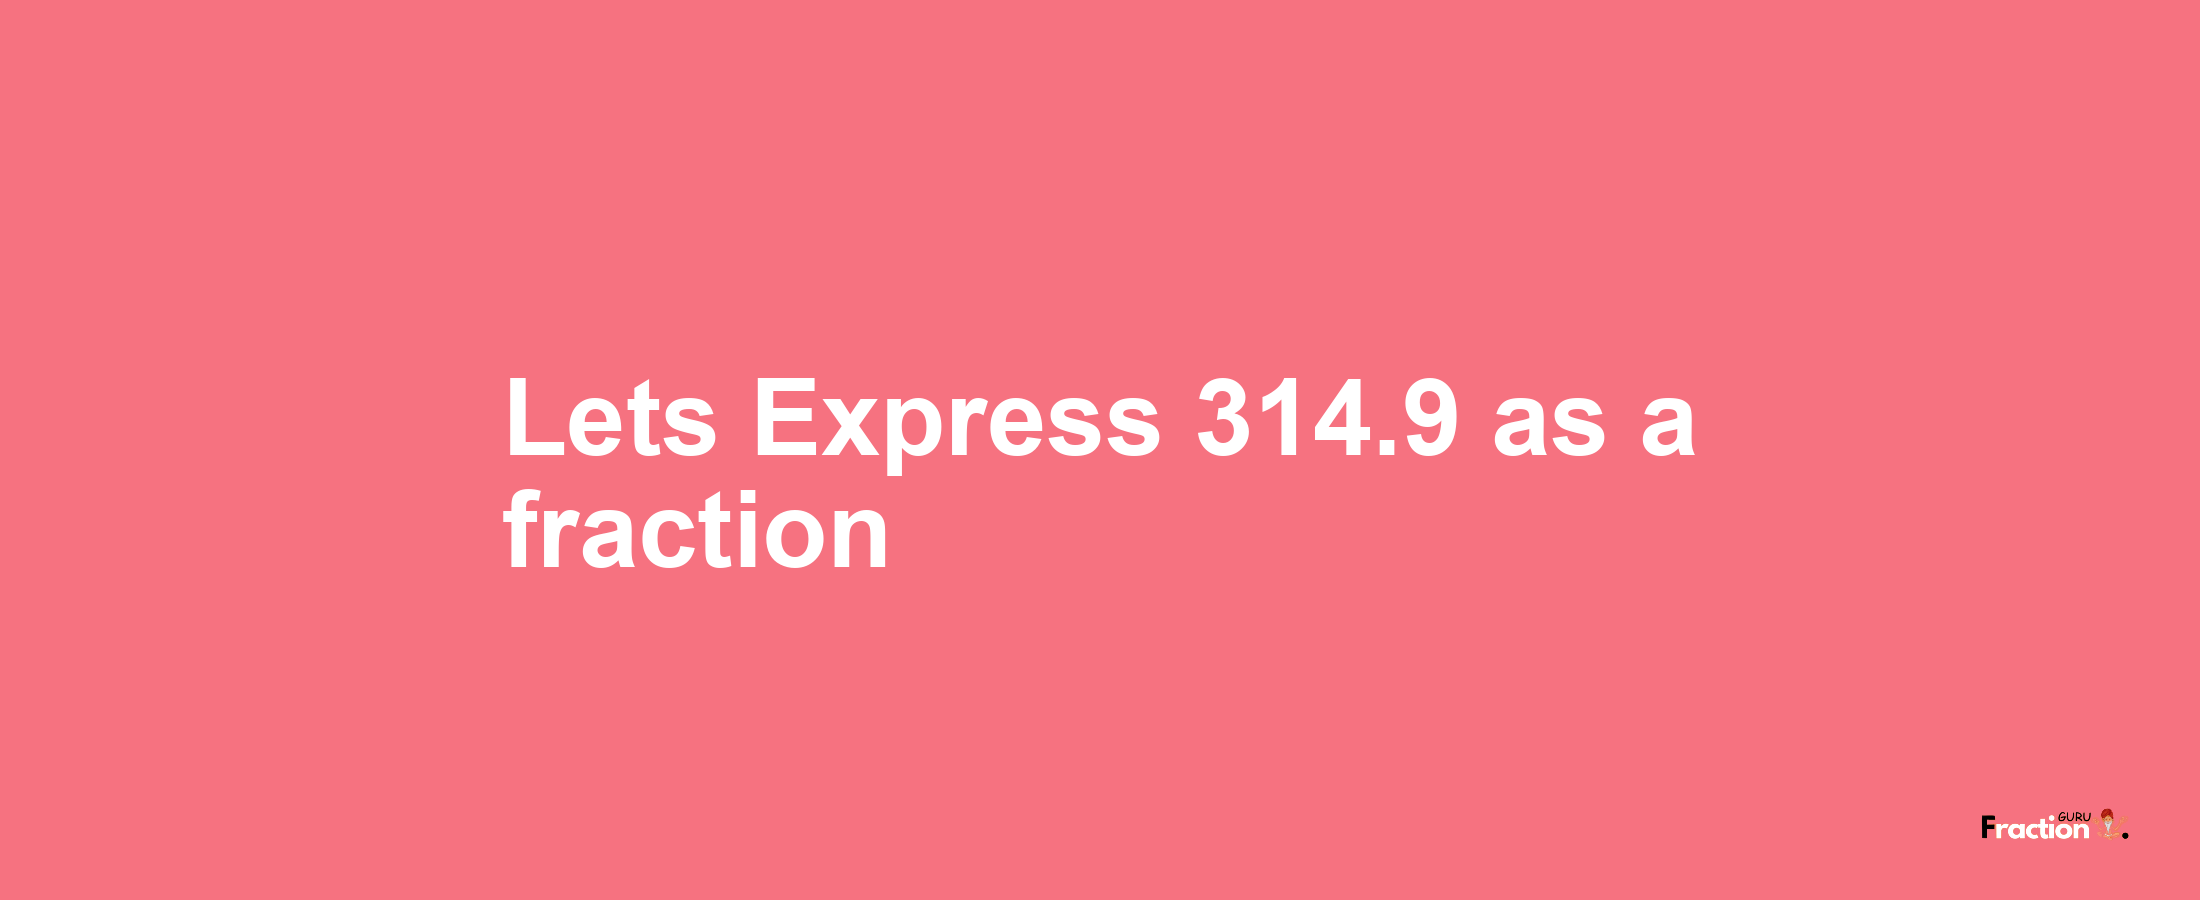 Lets Express 314.9 as afraction